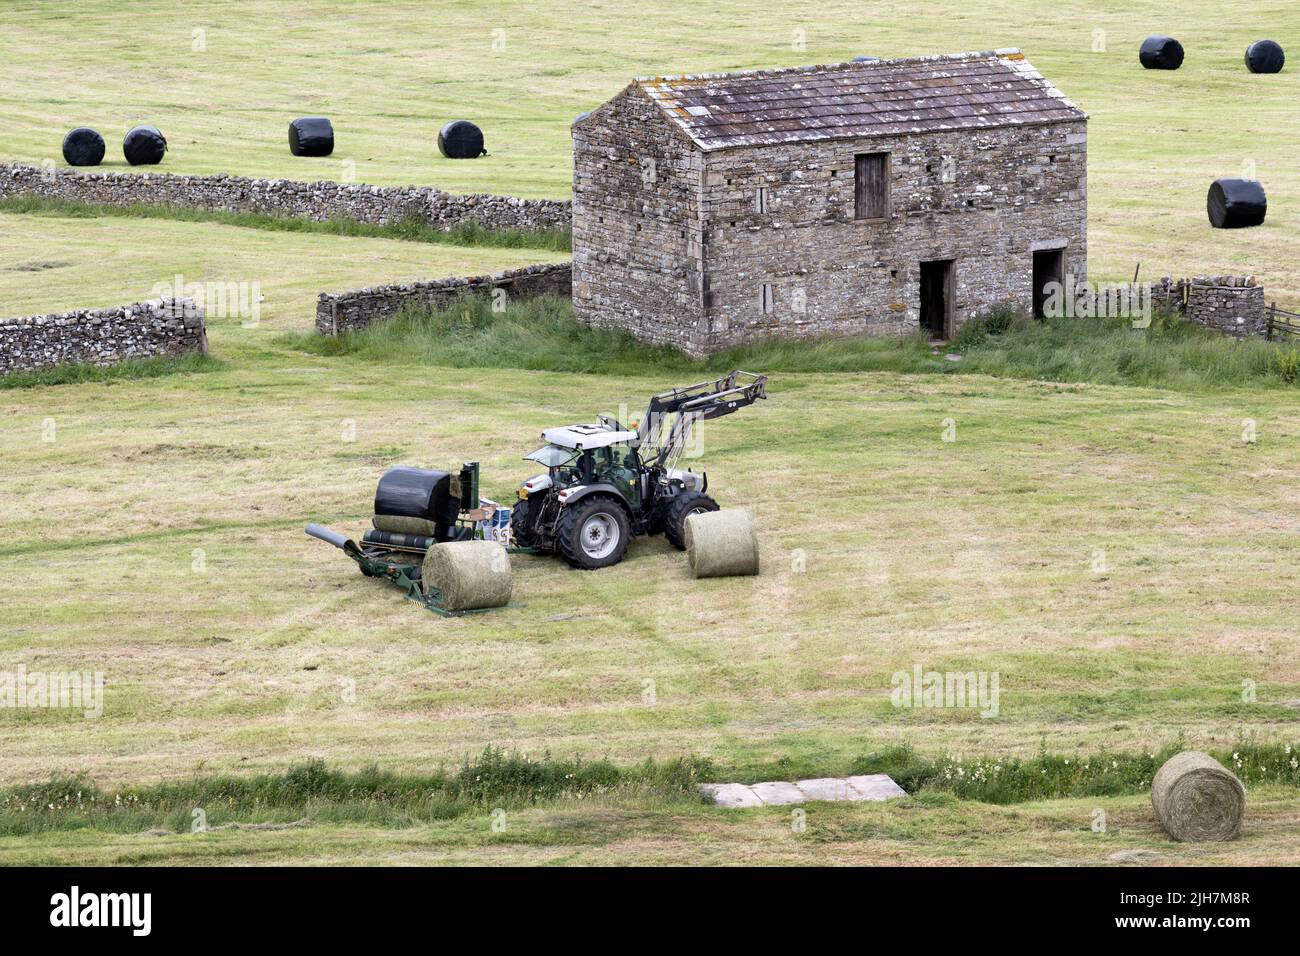 Summer haymaking, Hawes, Wensleydale, North Yorkshire. Round bales are wrapped with plastic to exclude air to make silage or haylage for winter feed. Stock Photo